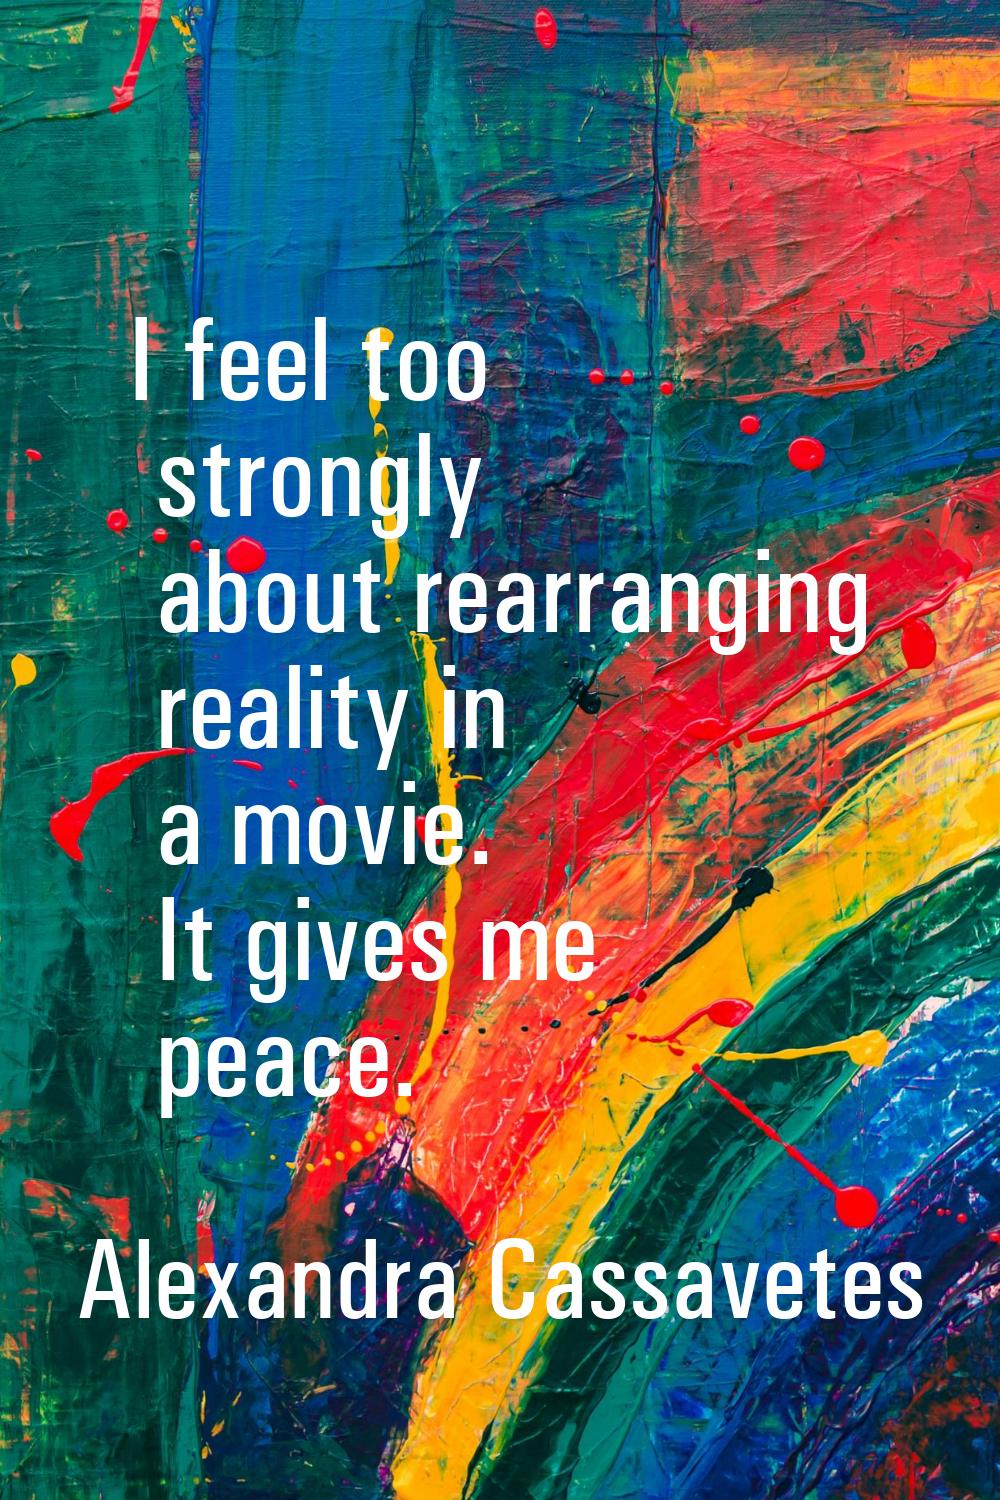 I feel too strongly about rearranging reality in a movie. It gives me peace.